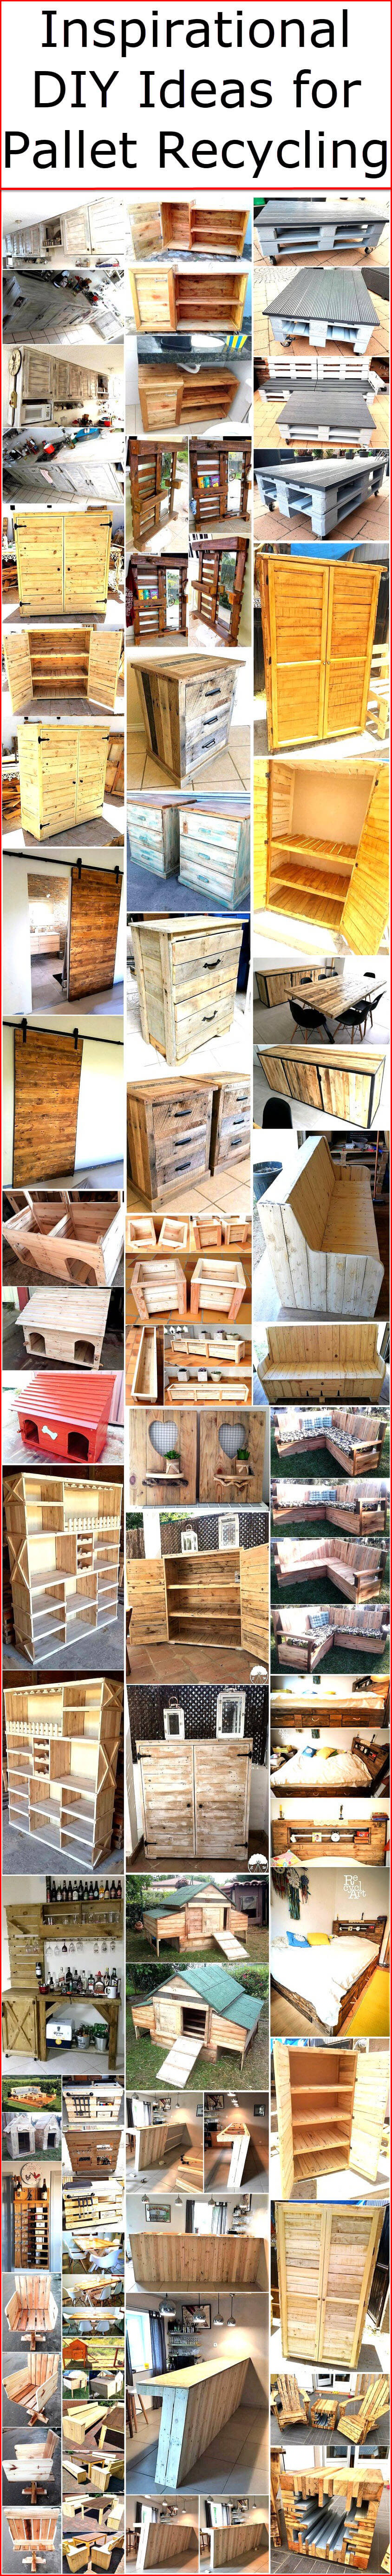 Inspirational DIY Ideas for Pallet Recycling